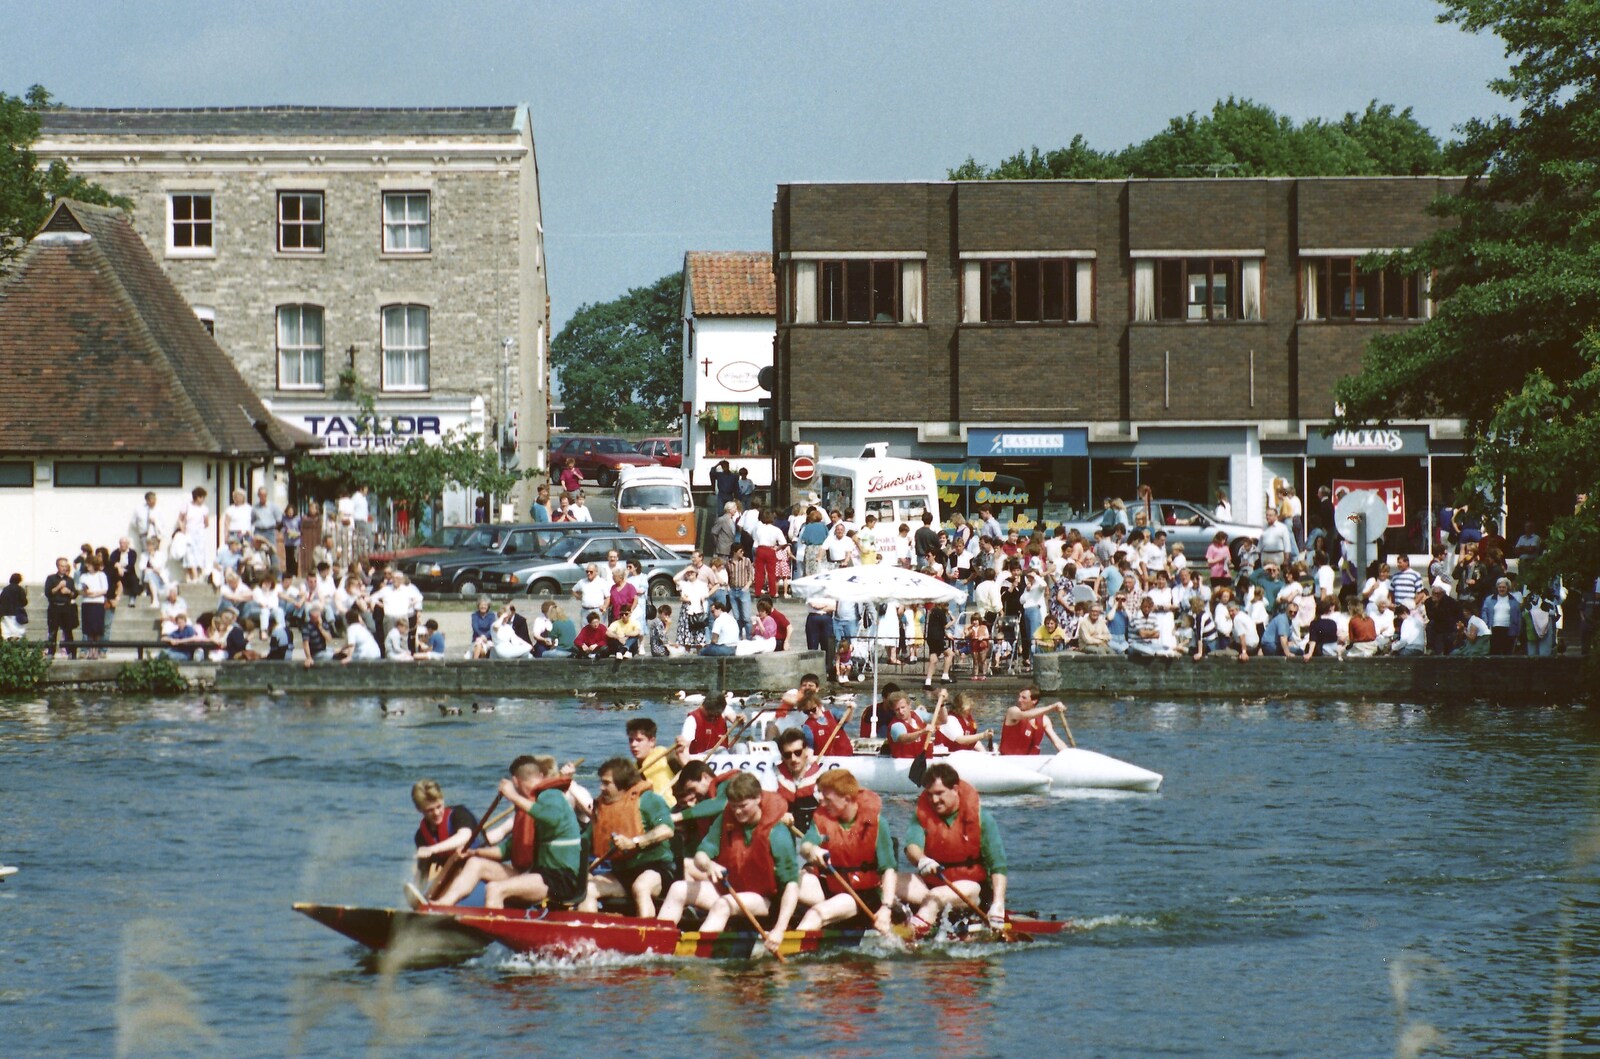 Rafts by Mere's Mouth from A Raft Race on the Mere, Diss, Norfolk - 2nd June 1990